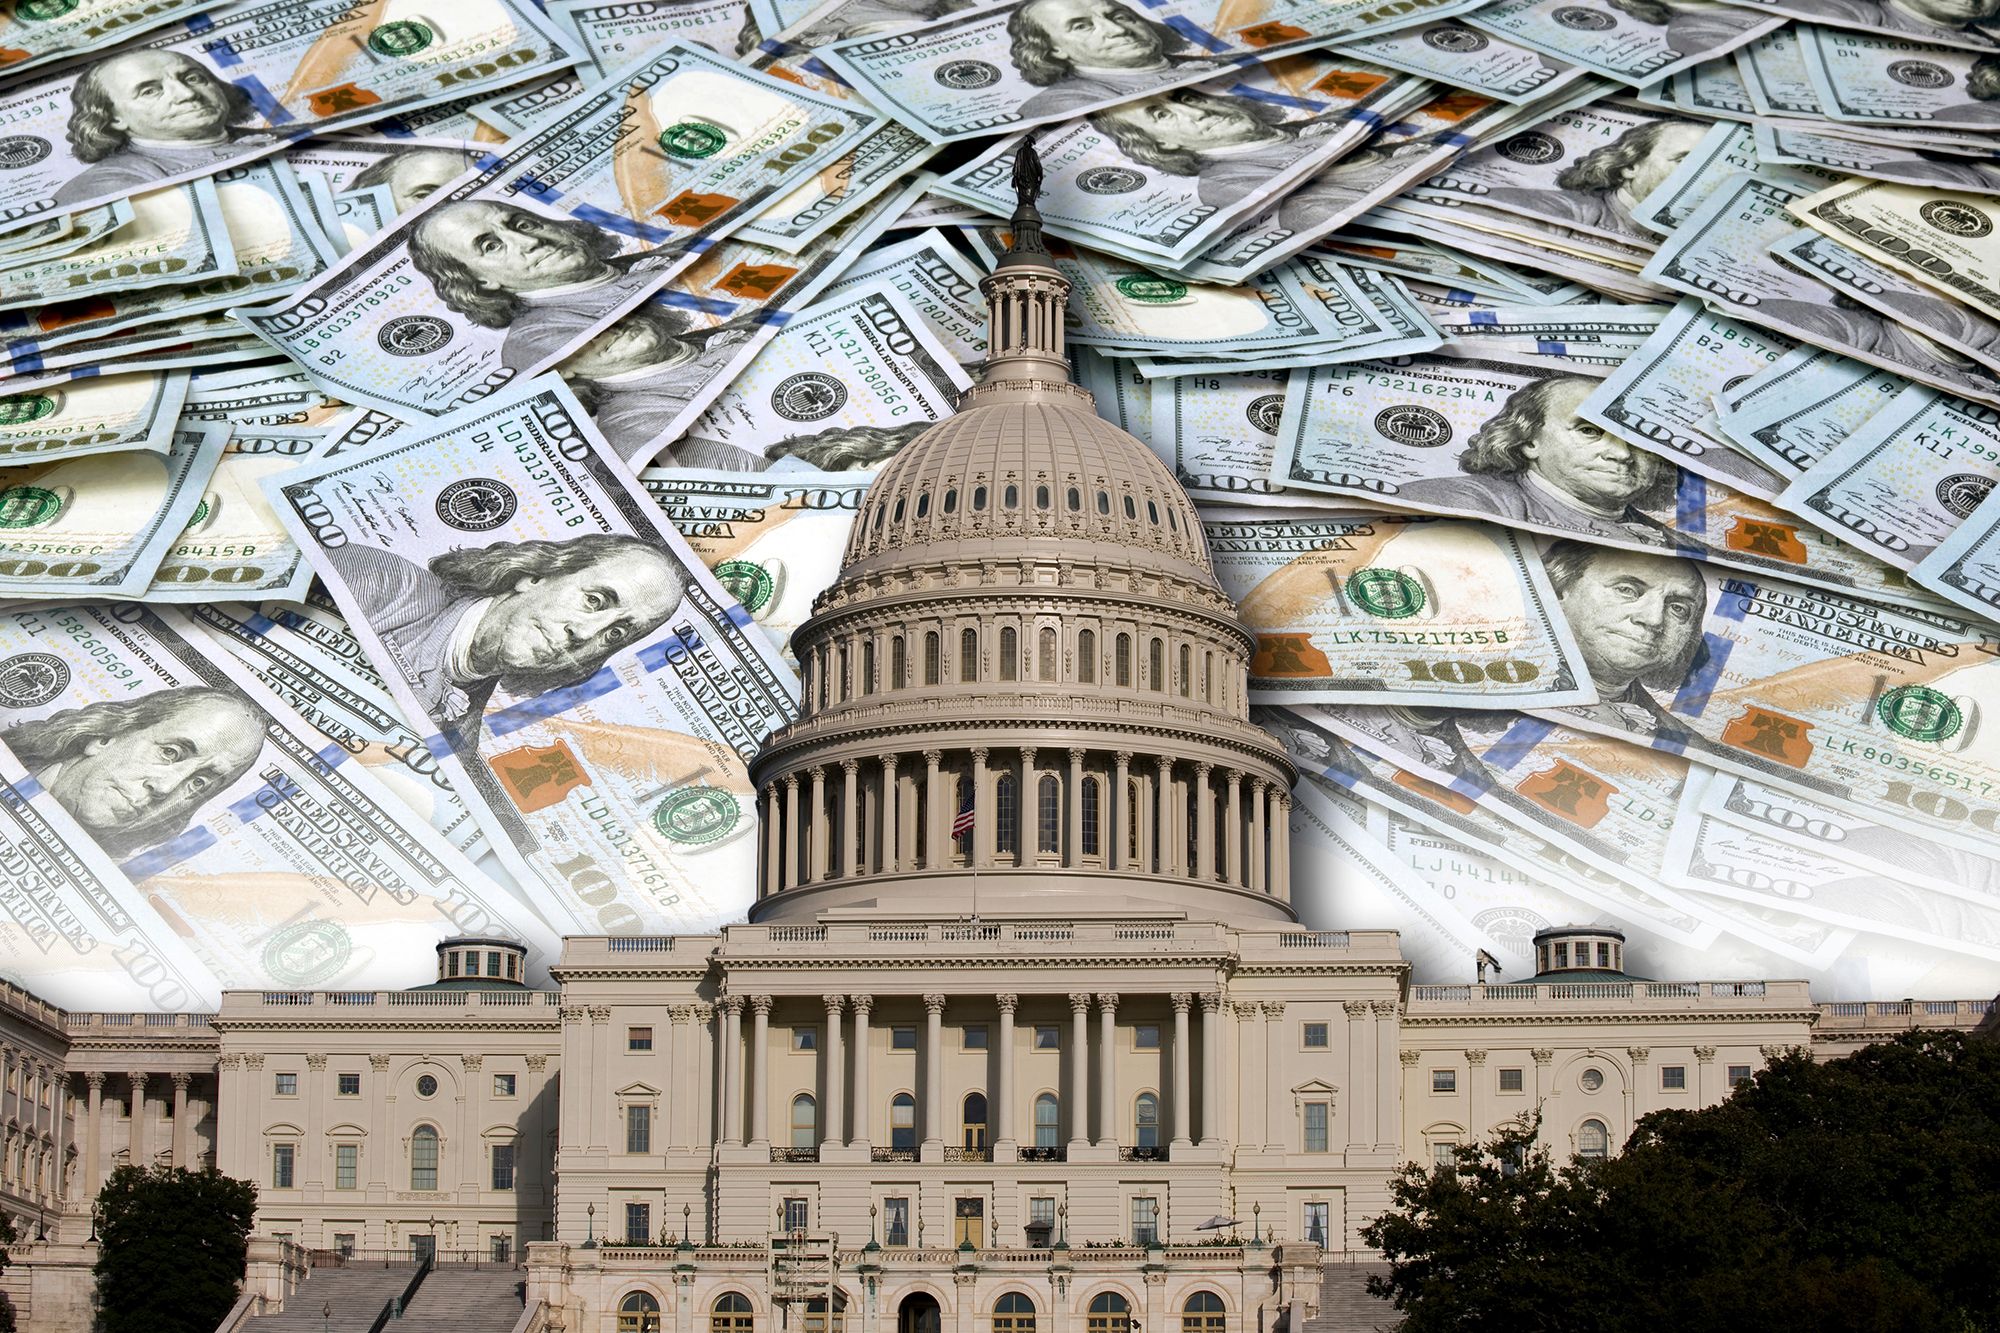 Big Spending Money Mischief Hurts the Nation: Can governments cure depressions by spending print and tax their way to prosperity as most lawmakers now believe? No. The better way is so old it has been forgotten: less government, more liberty.